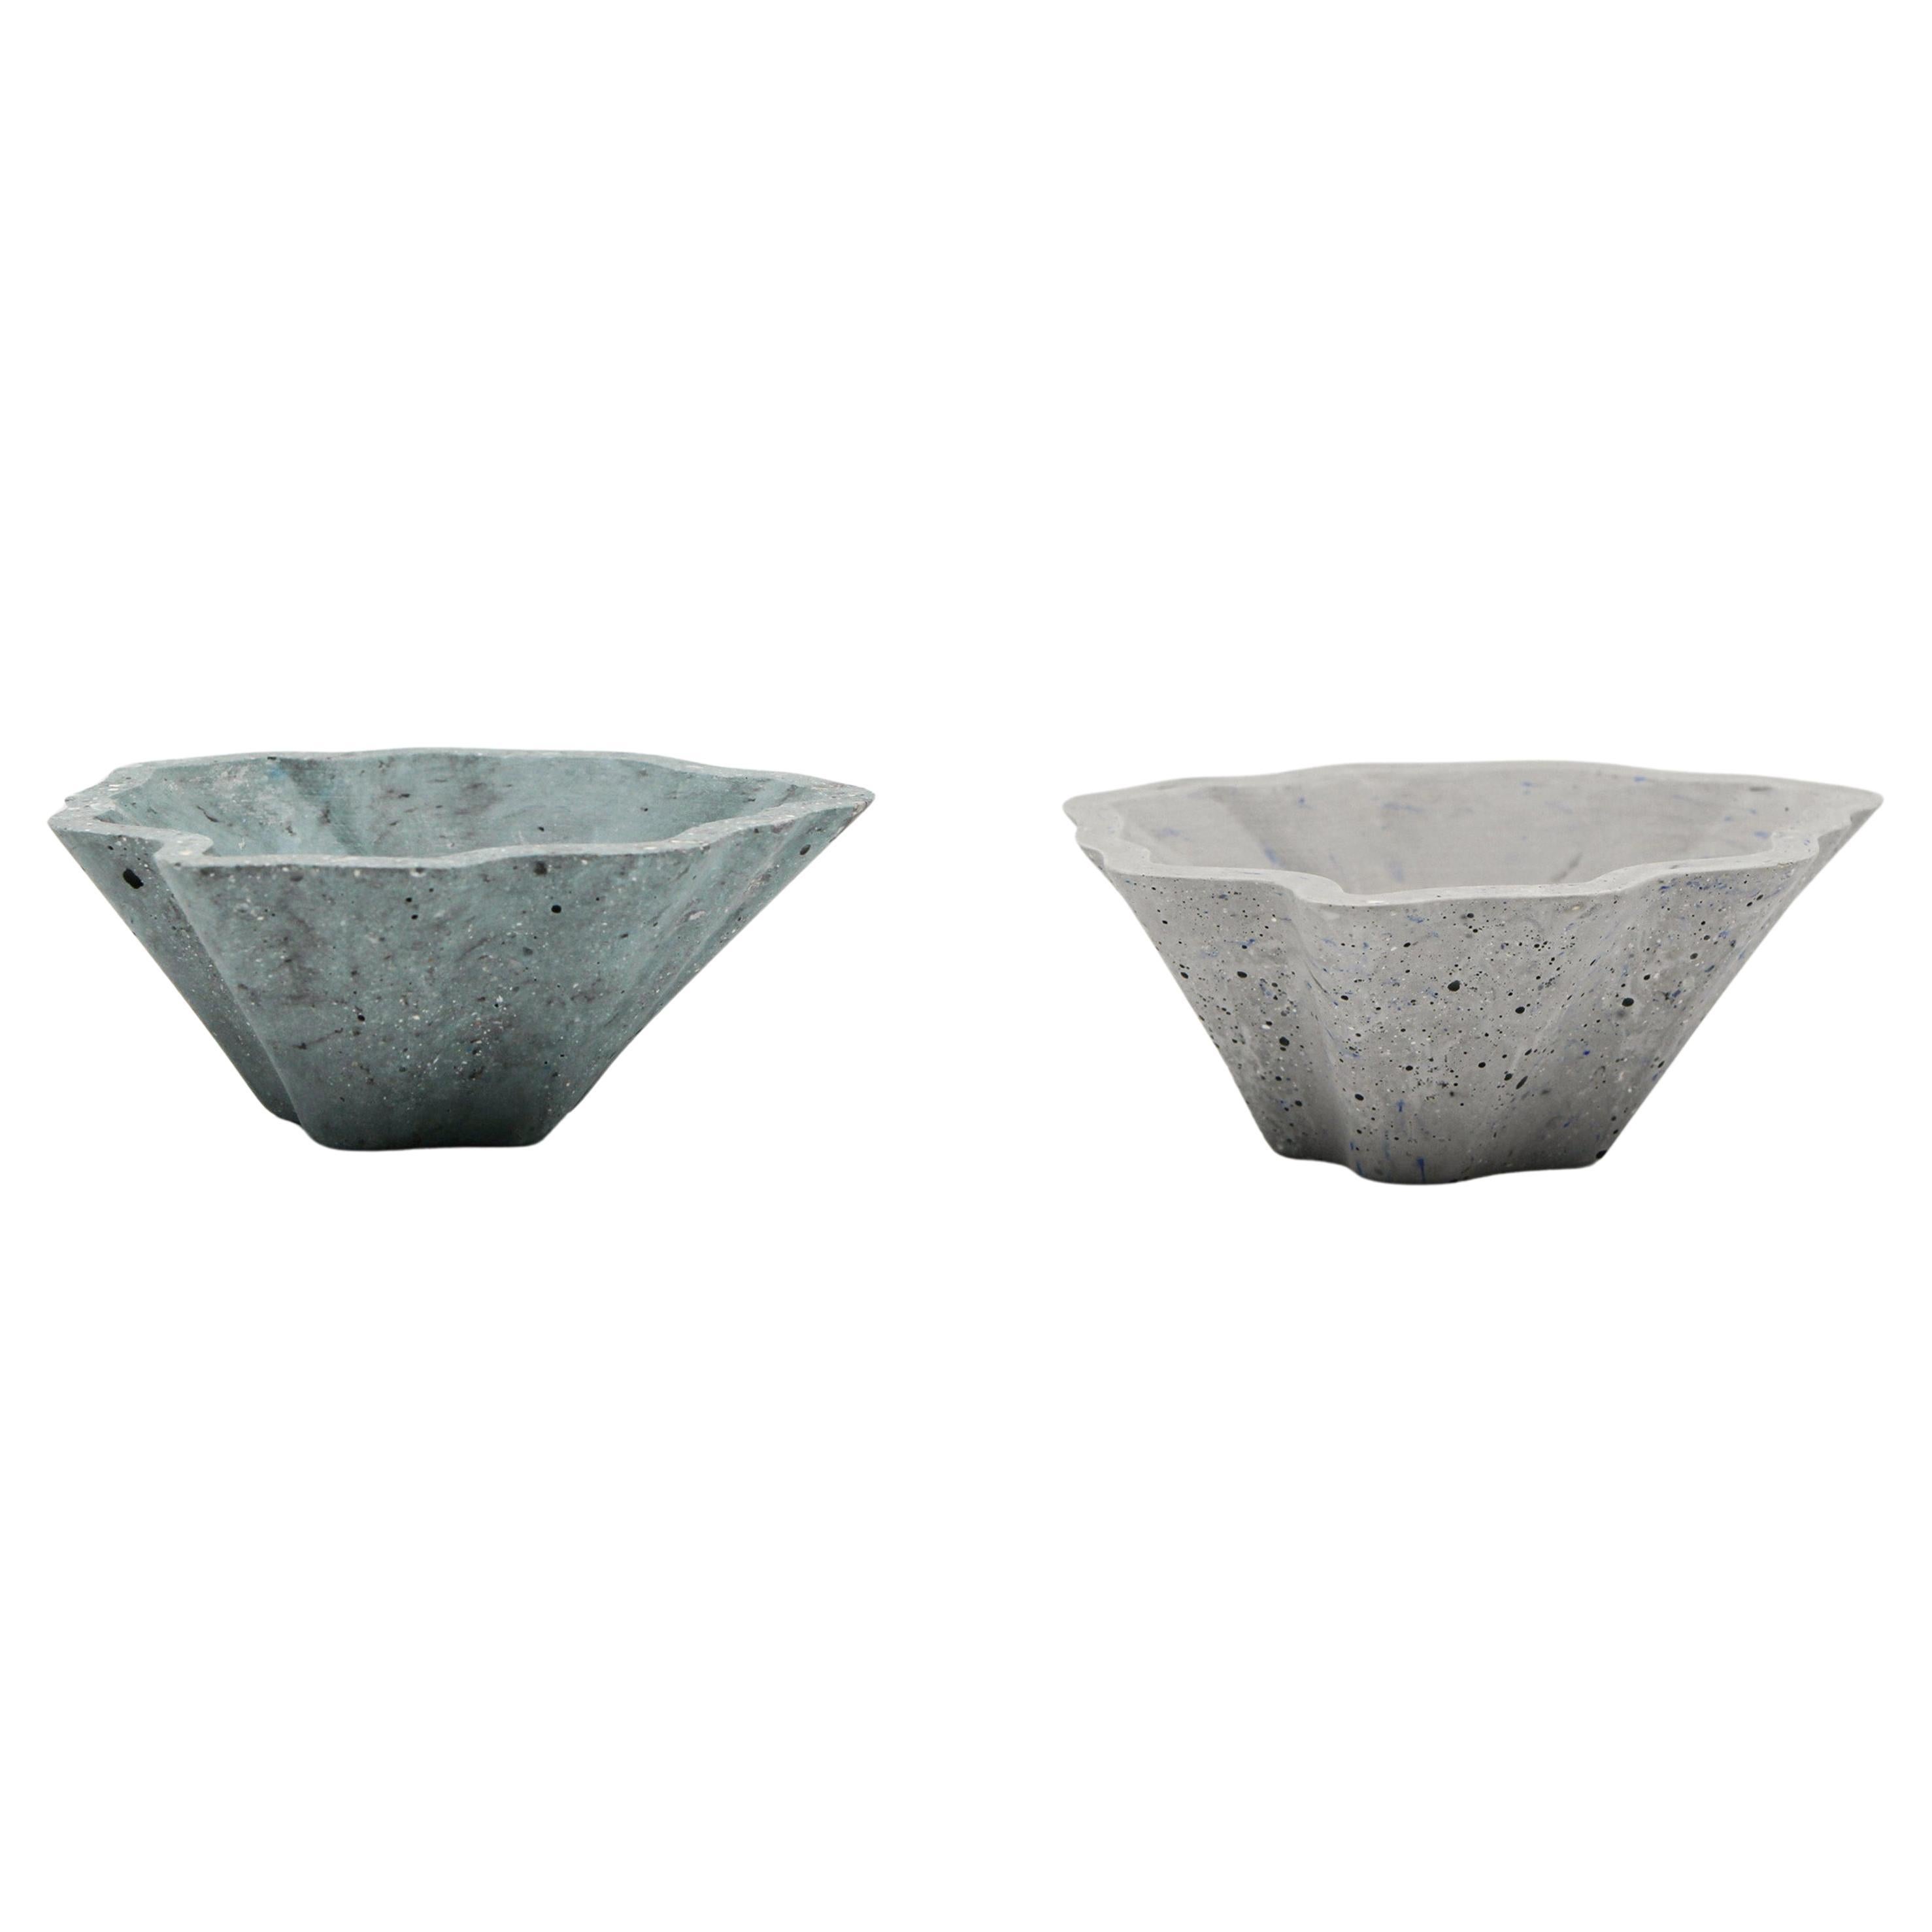 Set of 2 Oyster Shell Trays. From the Oygg series 